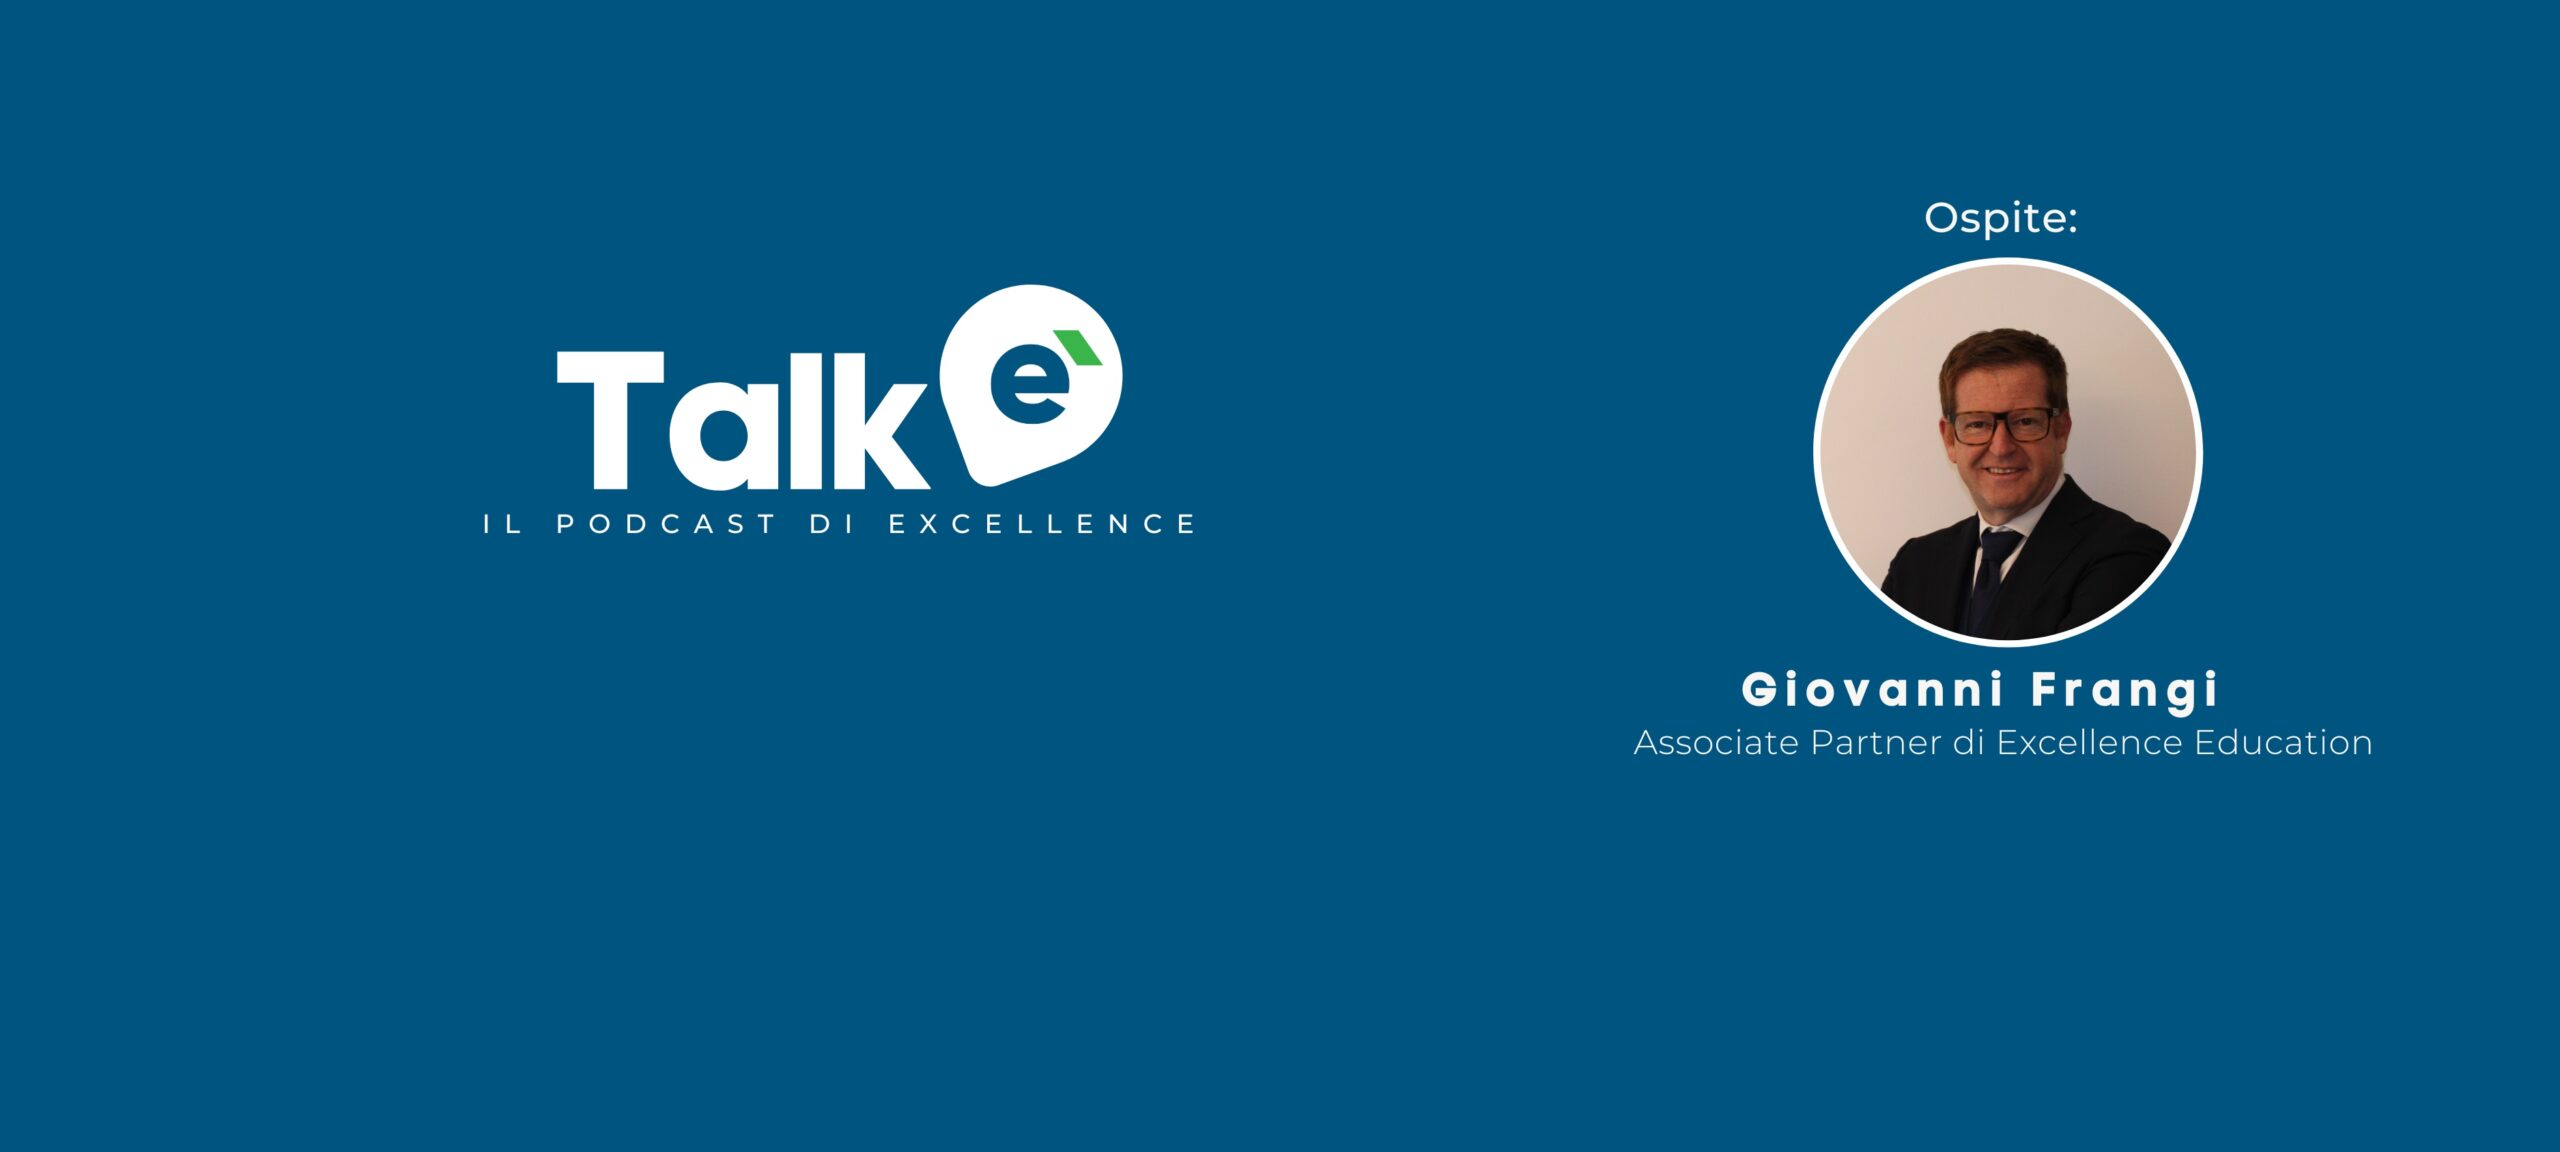 eTalk, the Excellence podcast: “Quiet Quitting, when the working environment makes the difference”